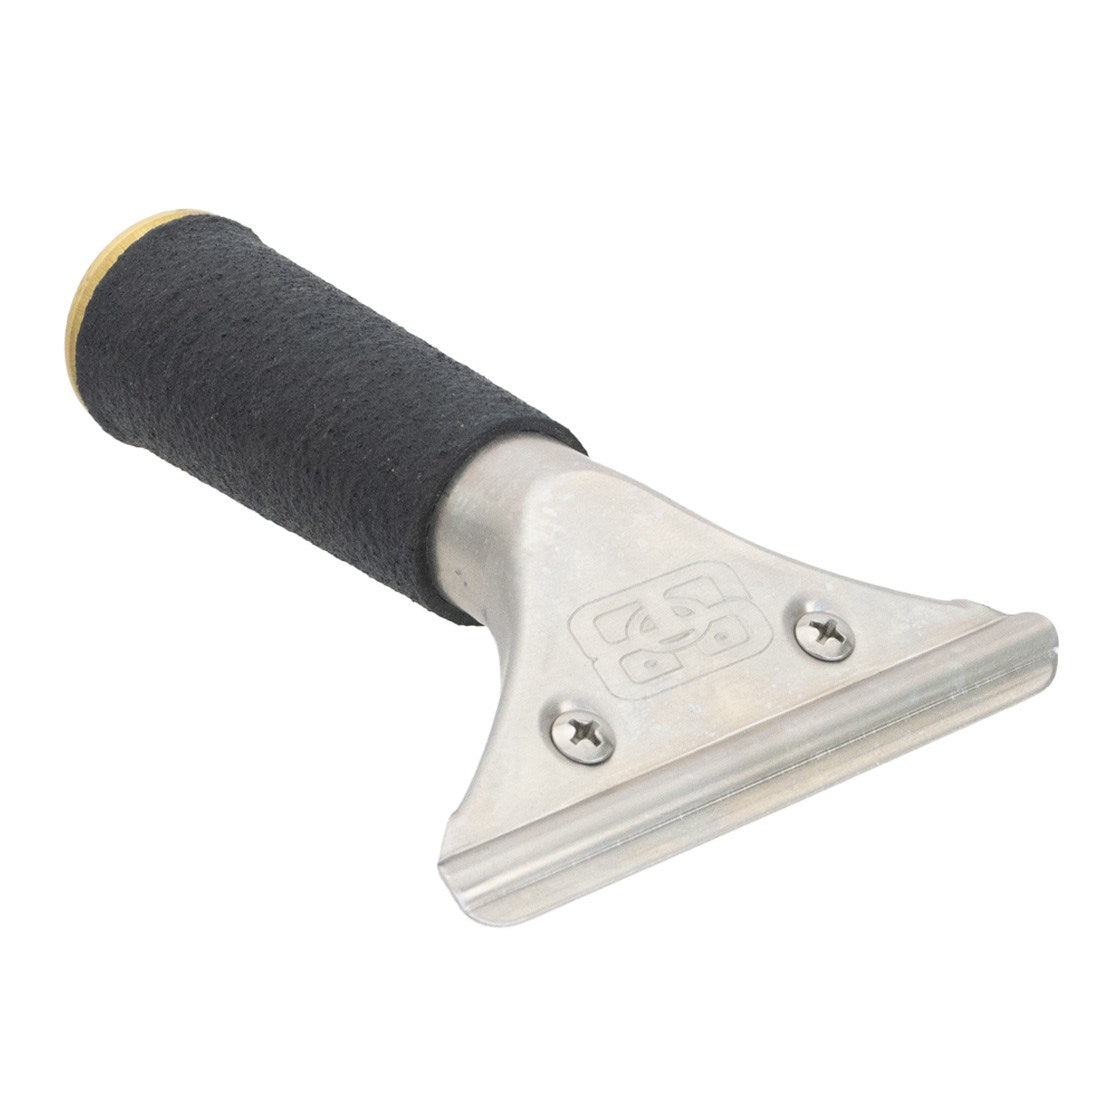 Sörbo Complete Swivel Viper Squeegee